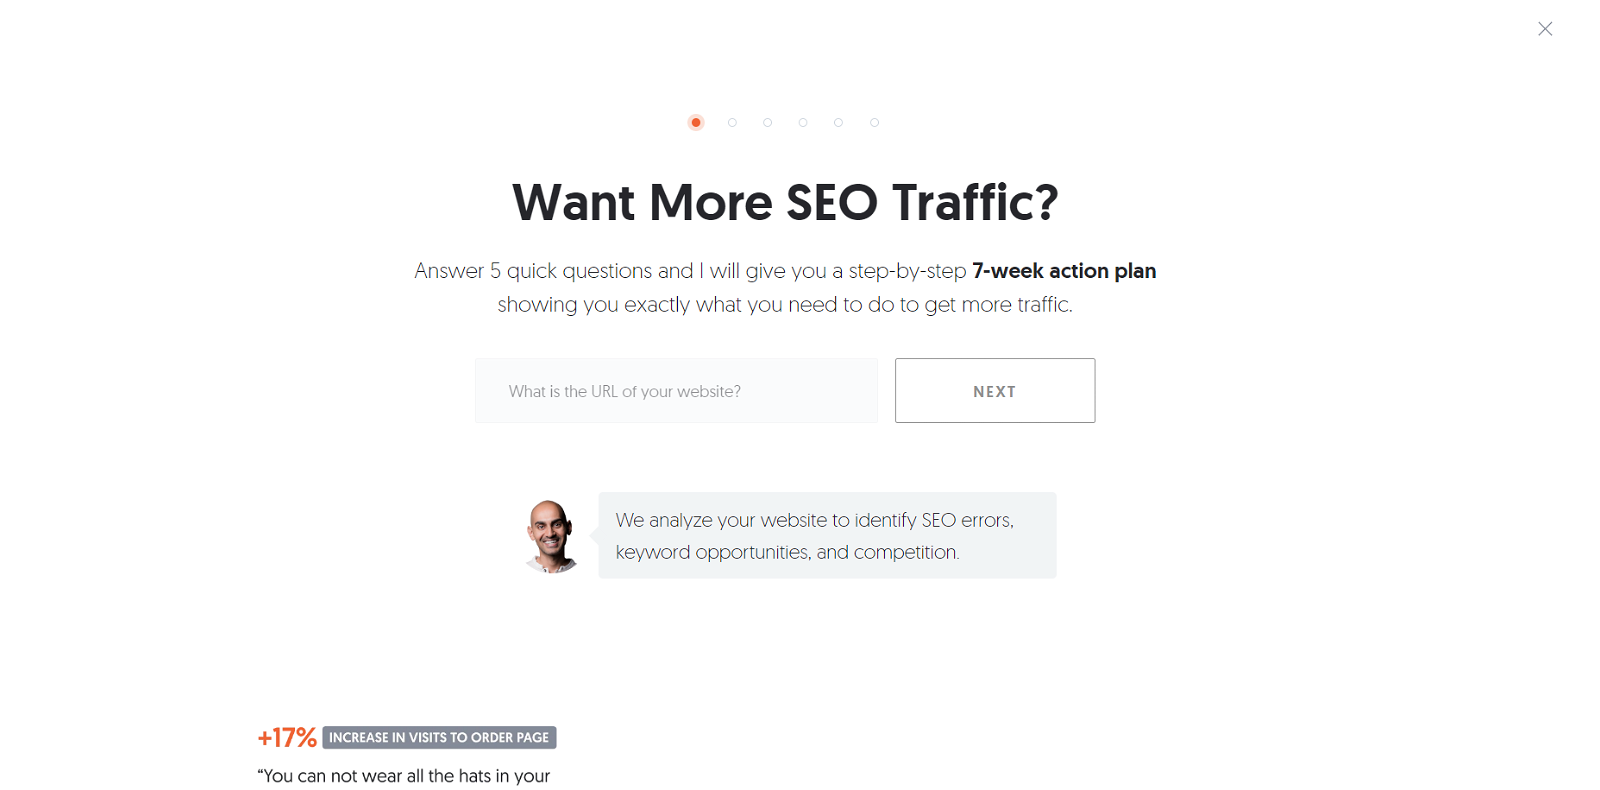 Neil Patel offers a 7-week SEO action plan on its SaaS tool UberSuggest.